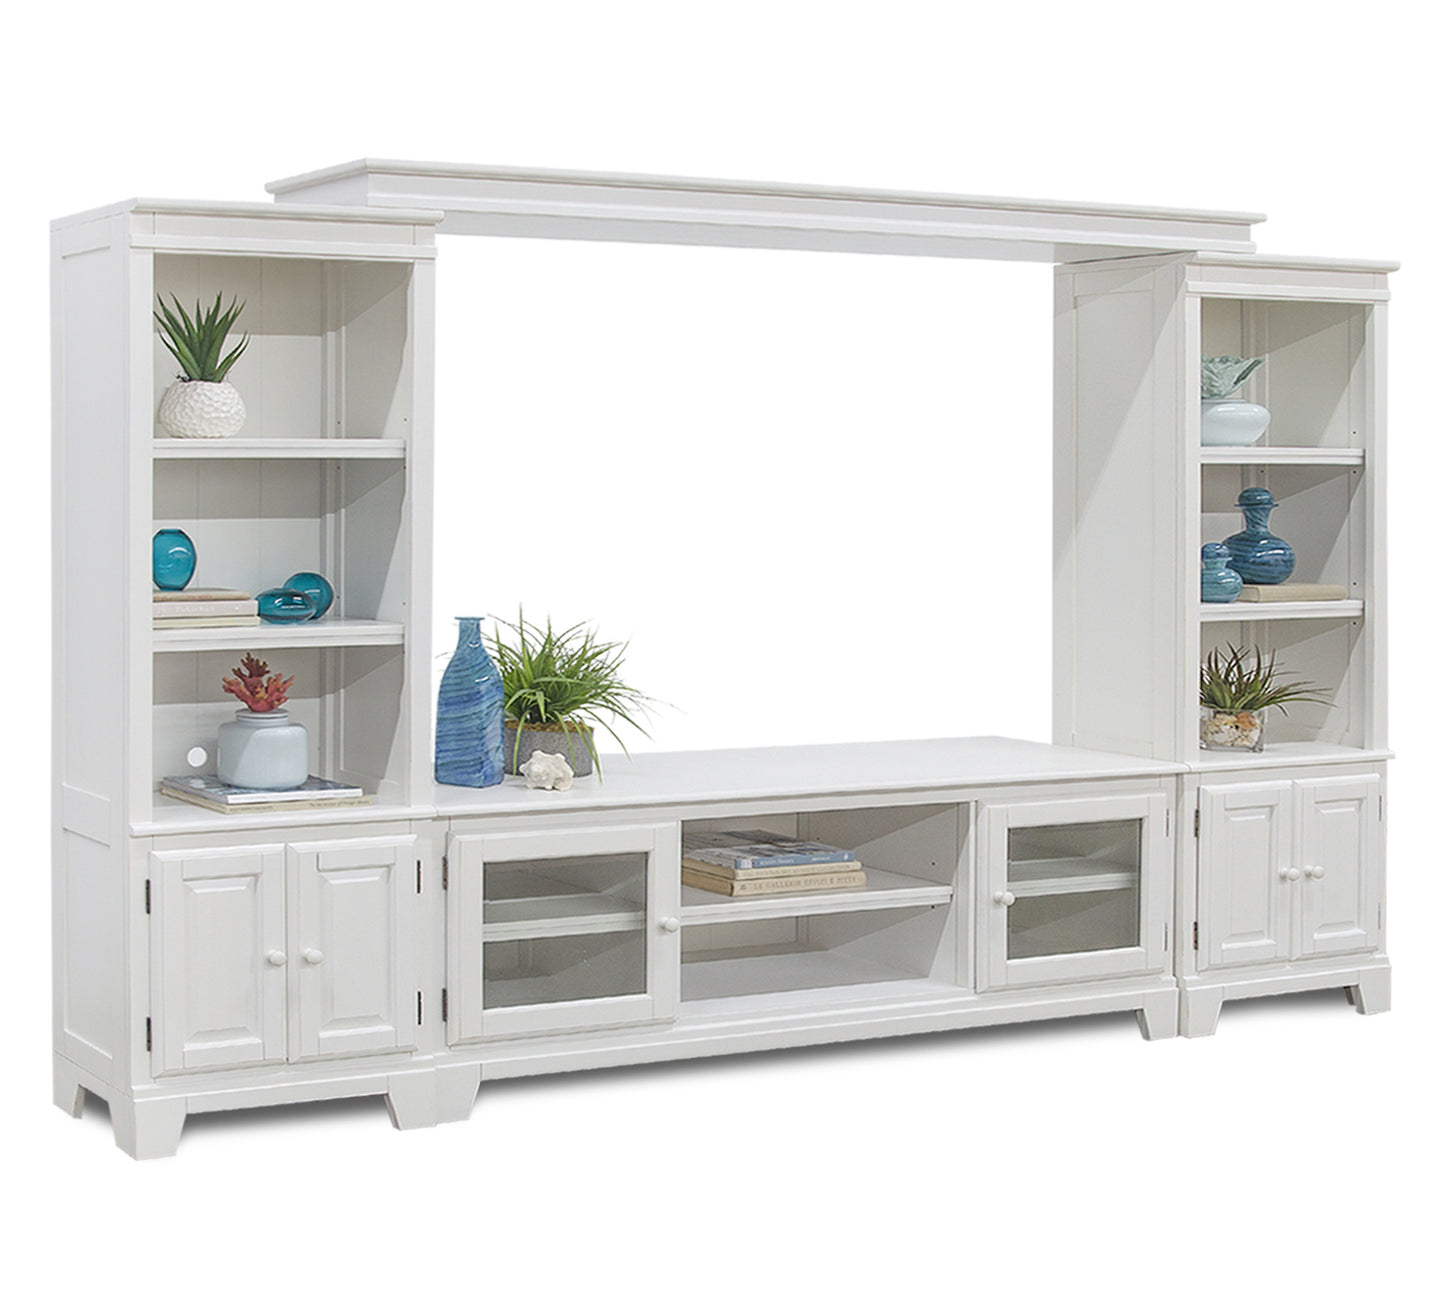 Crescent Bay II 4 Piece Wall Unit with 72" TV Console